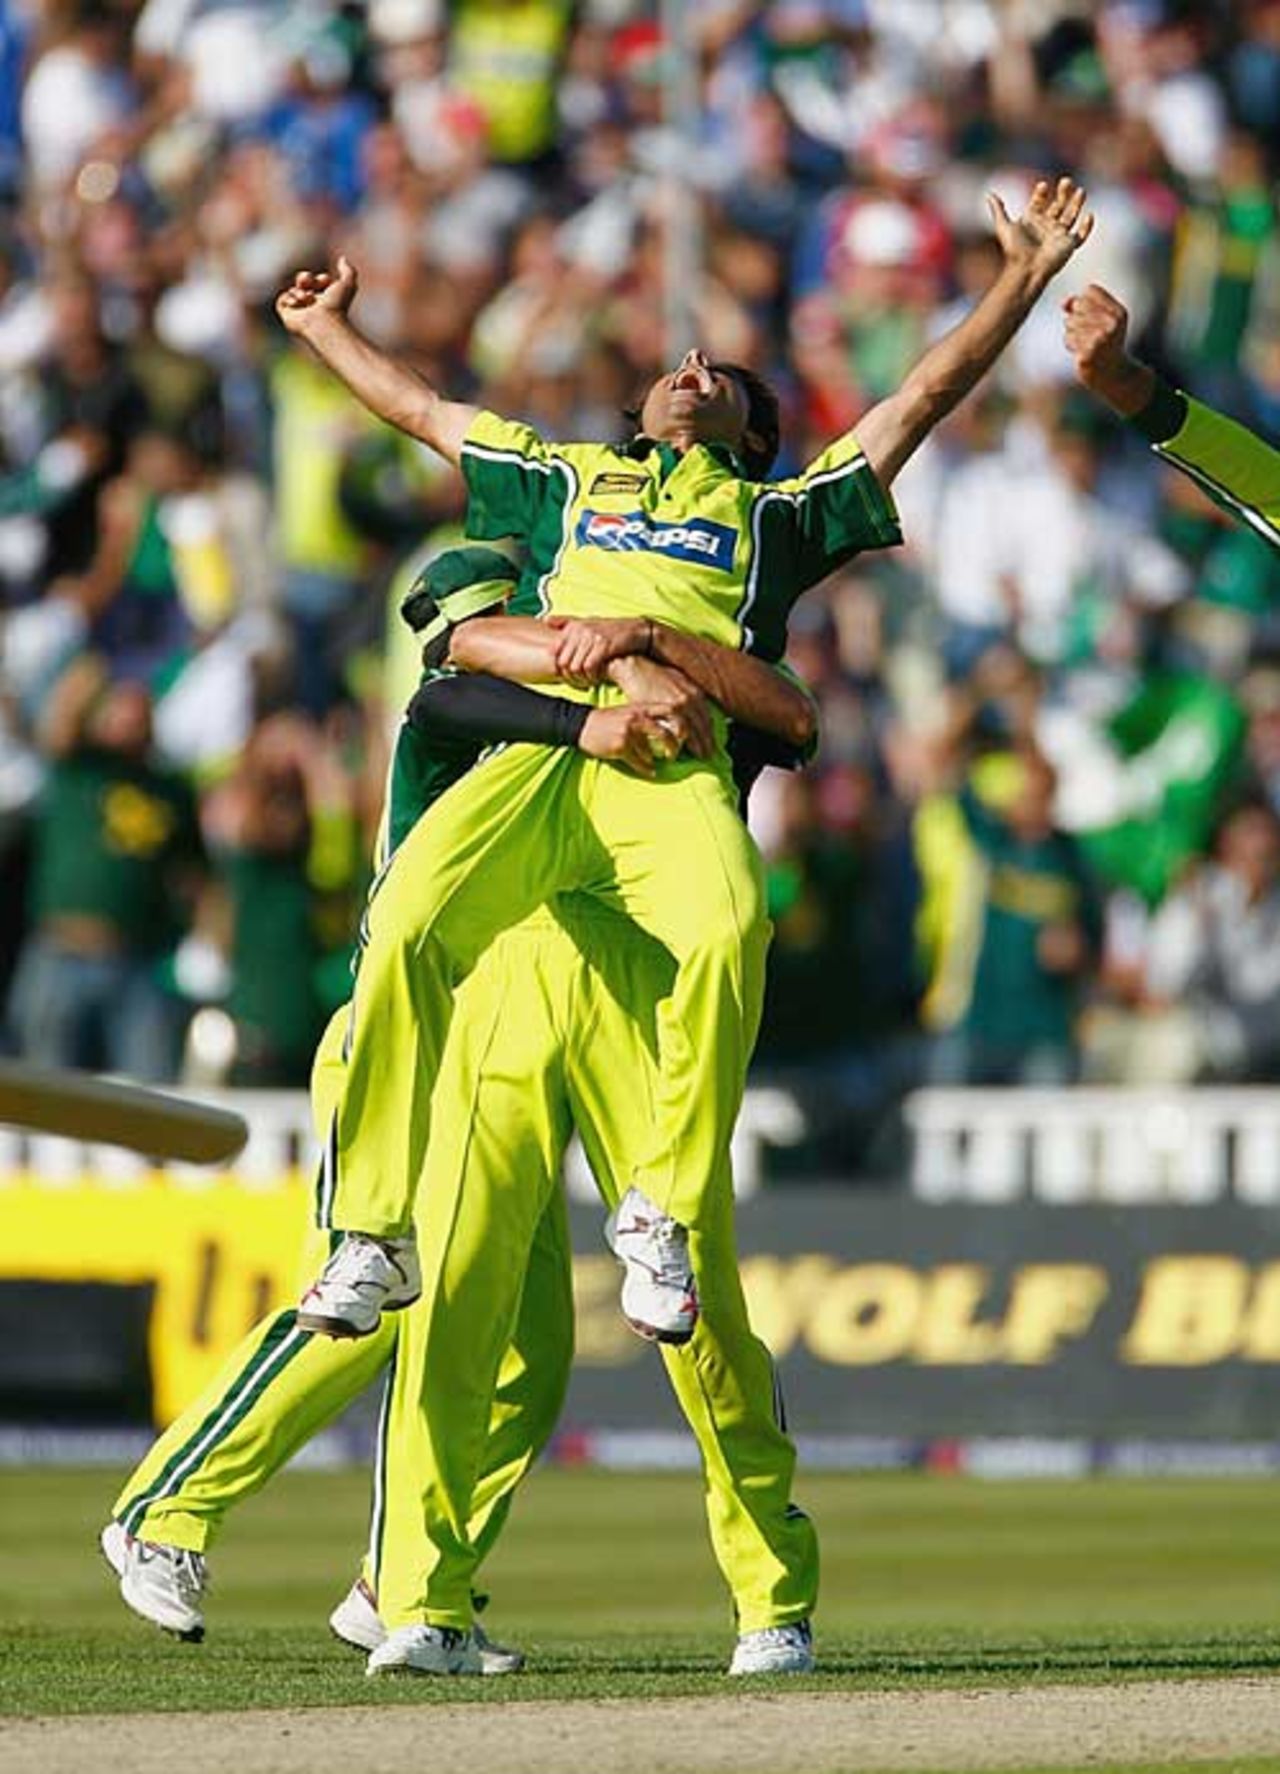 Abdul Razzaq is swamped by team-mates after trapping Paul Collingwood, England v Pakistan, 5th ODI, Edgbaston, September 10, 2006